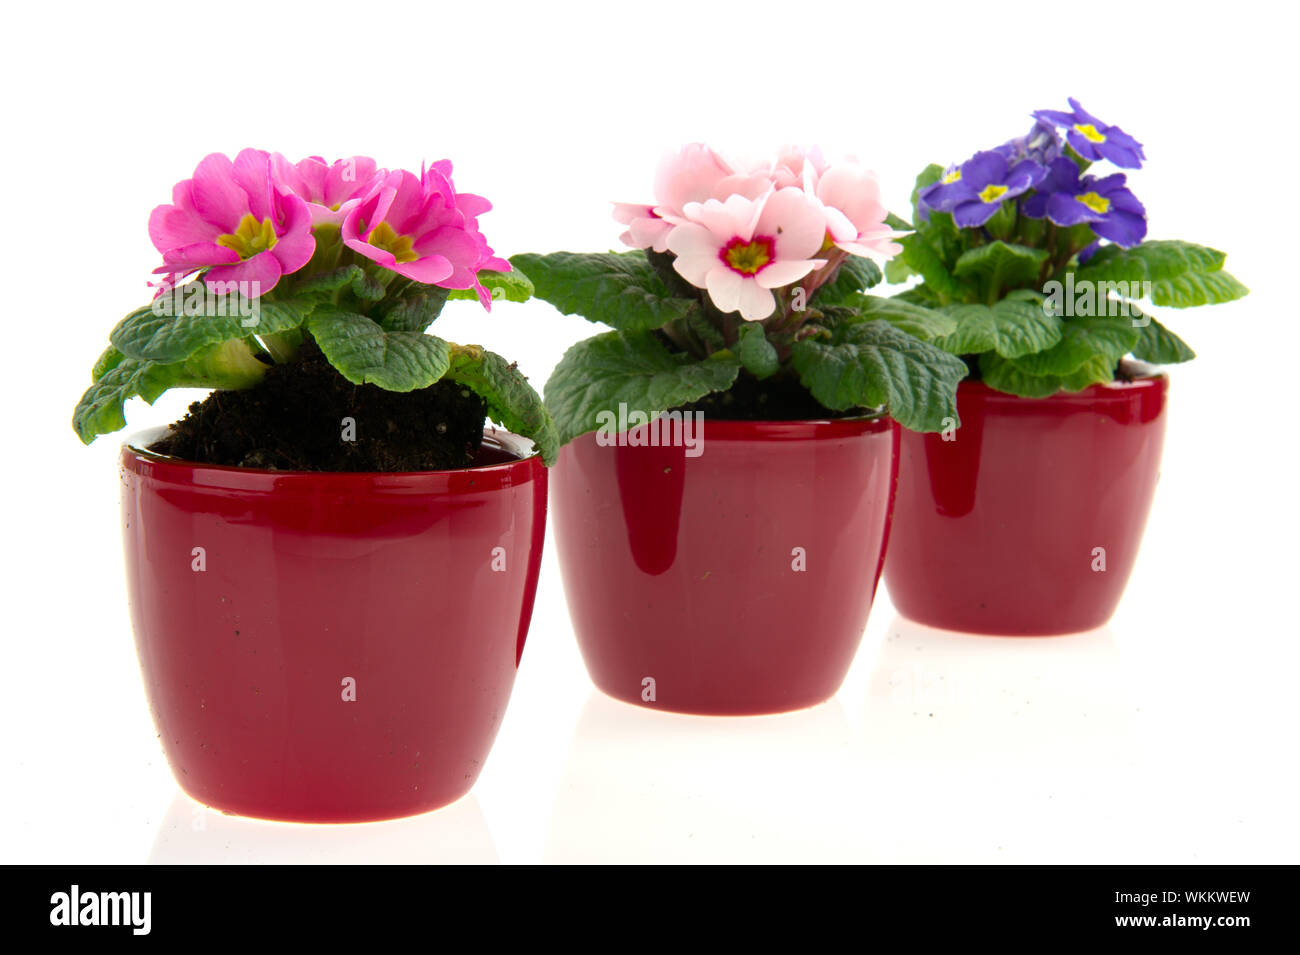 Earthenware pots with colorful primroses isolated over white Stock Photo